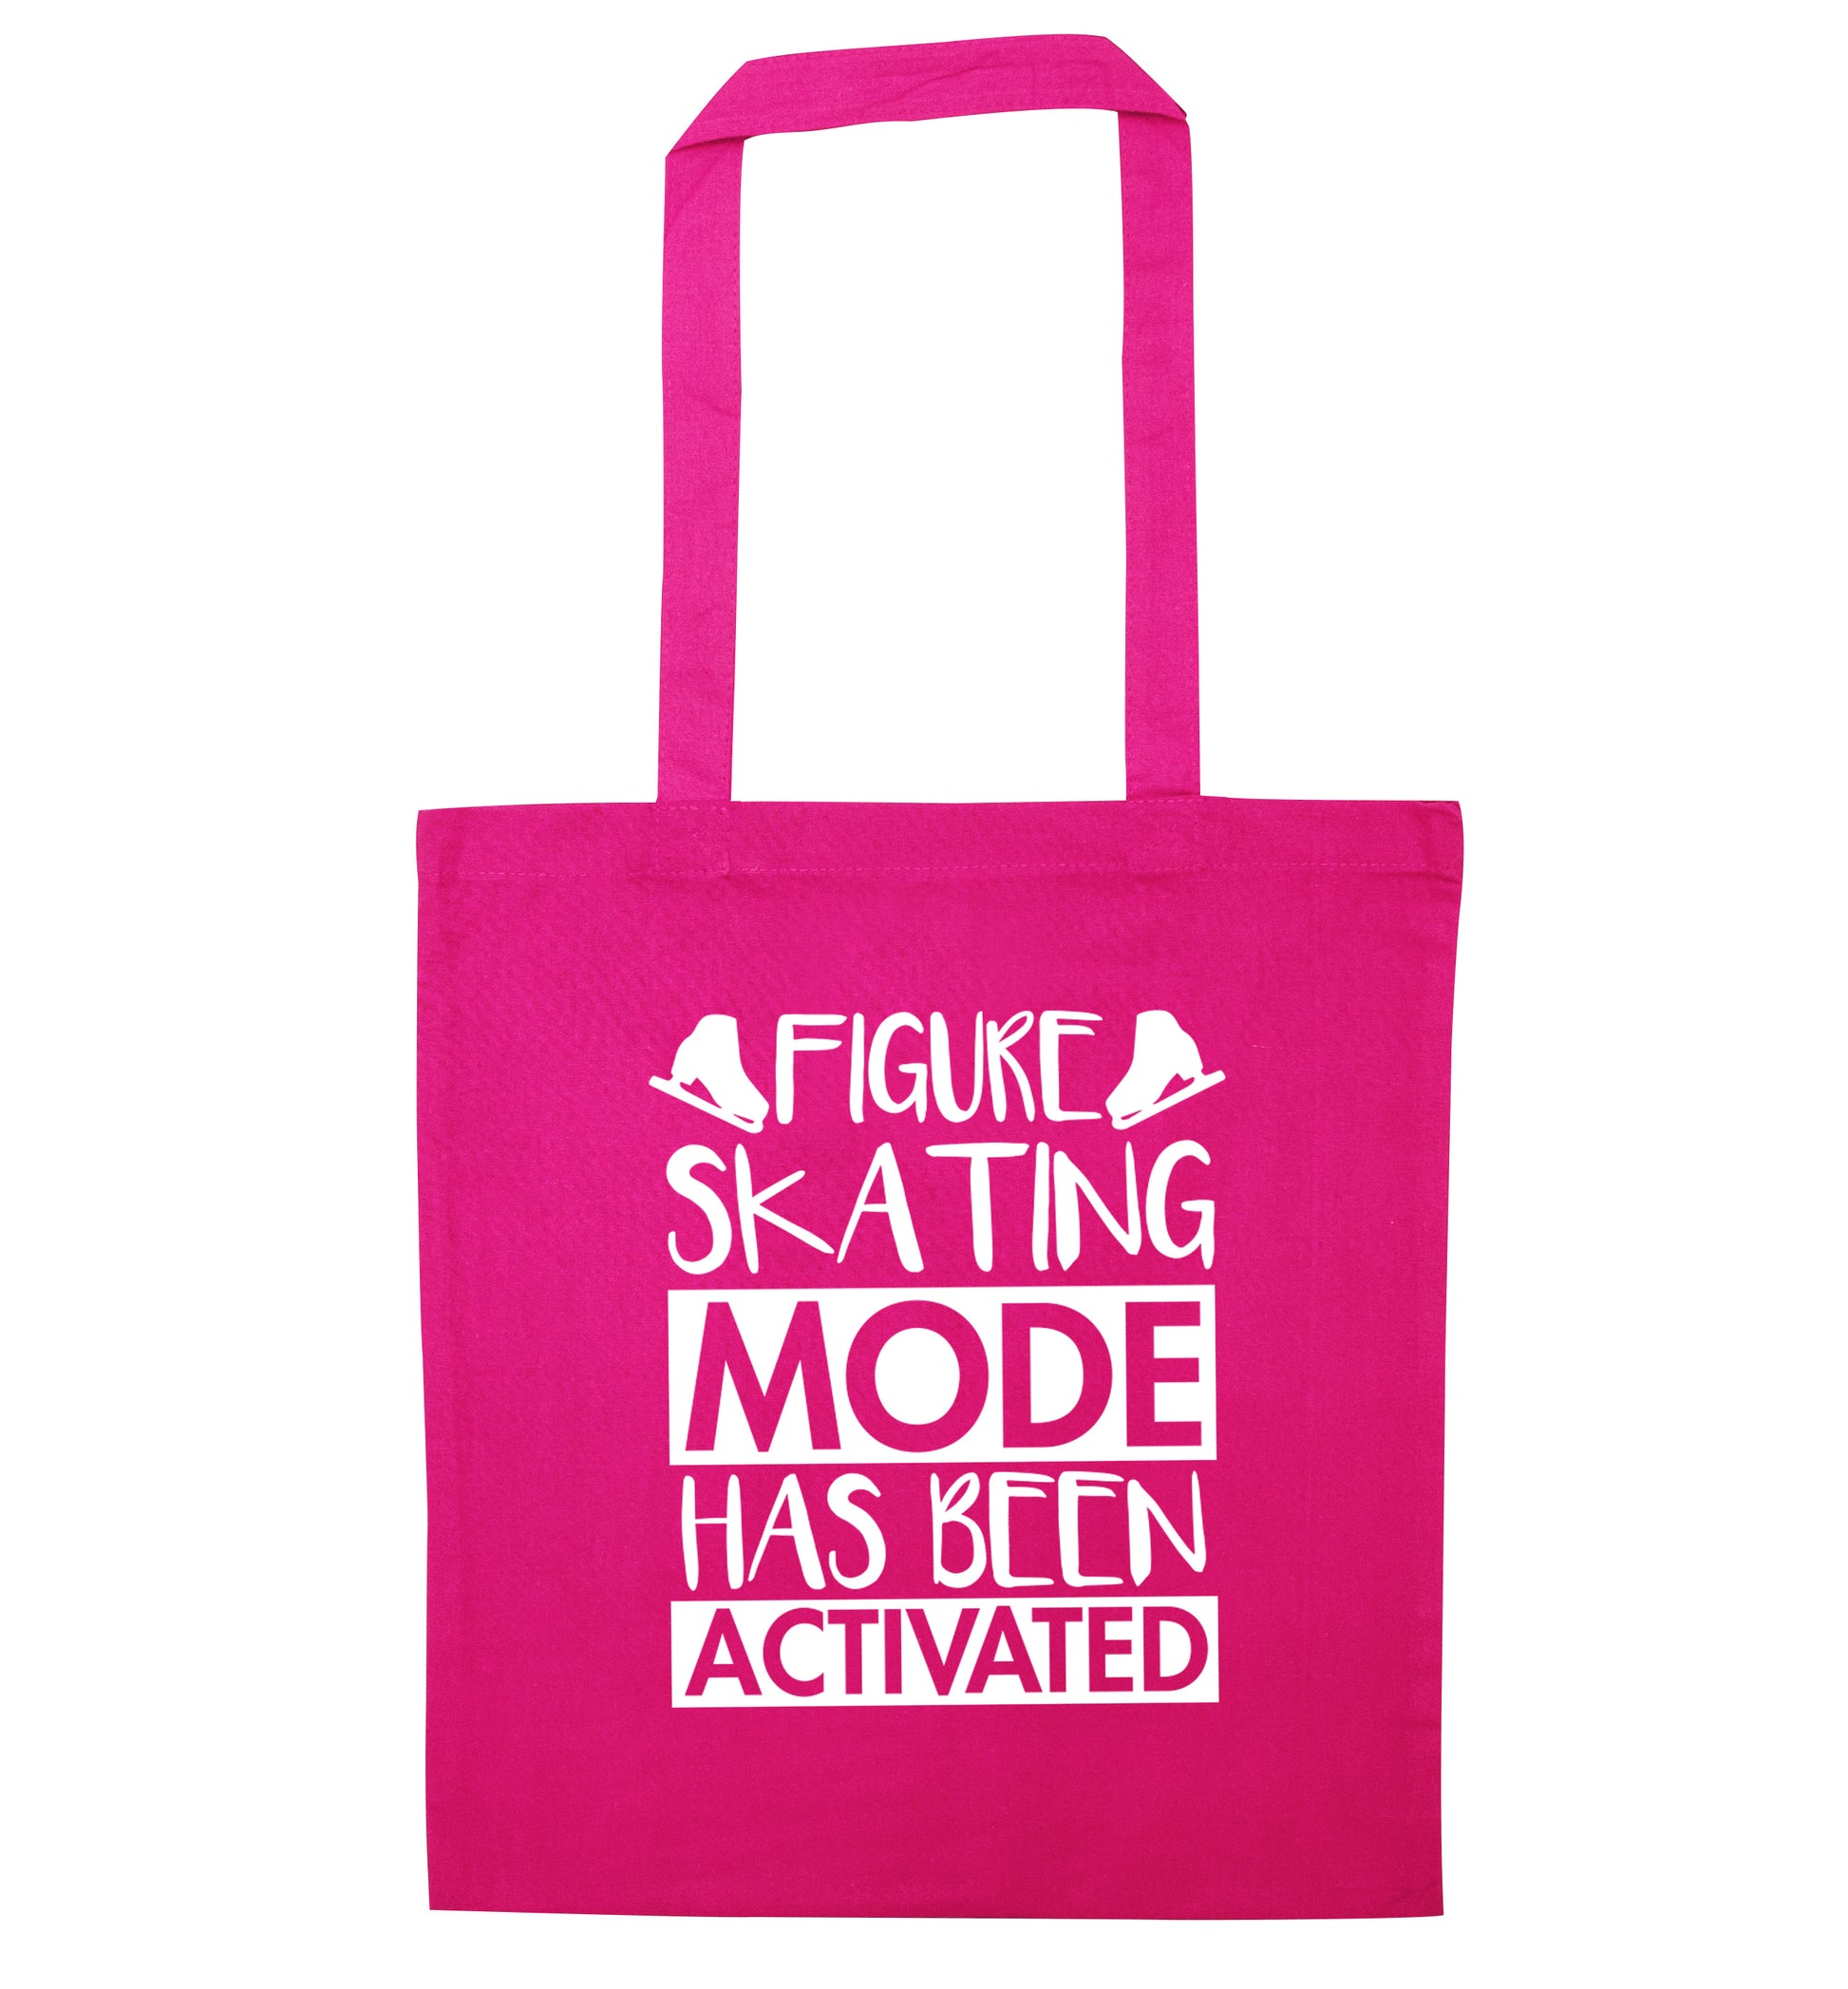 Figure skating mode activated pink tote bag